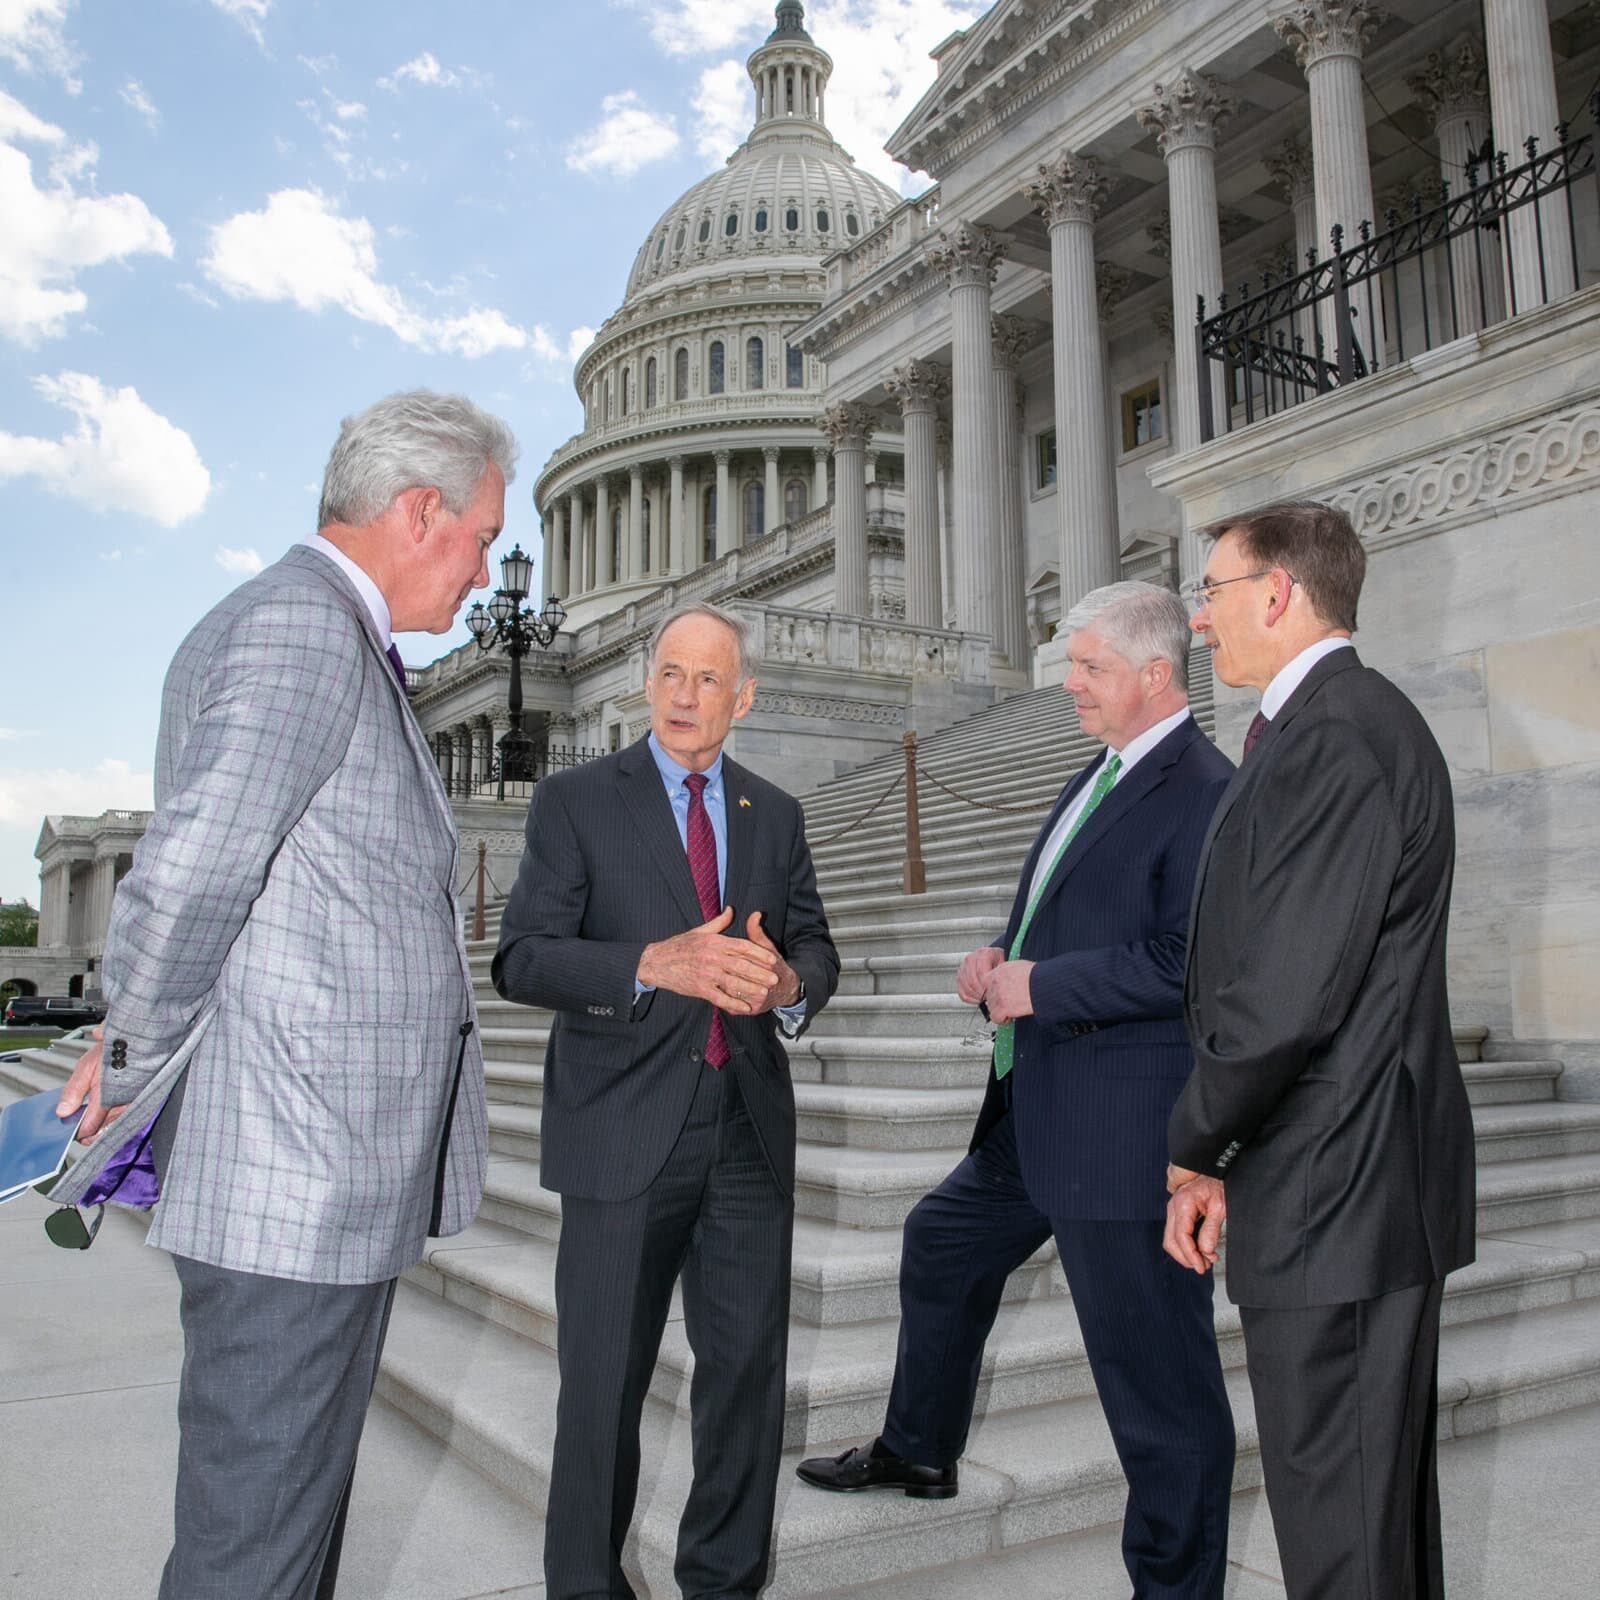 Men chatting on capitol hill steps